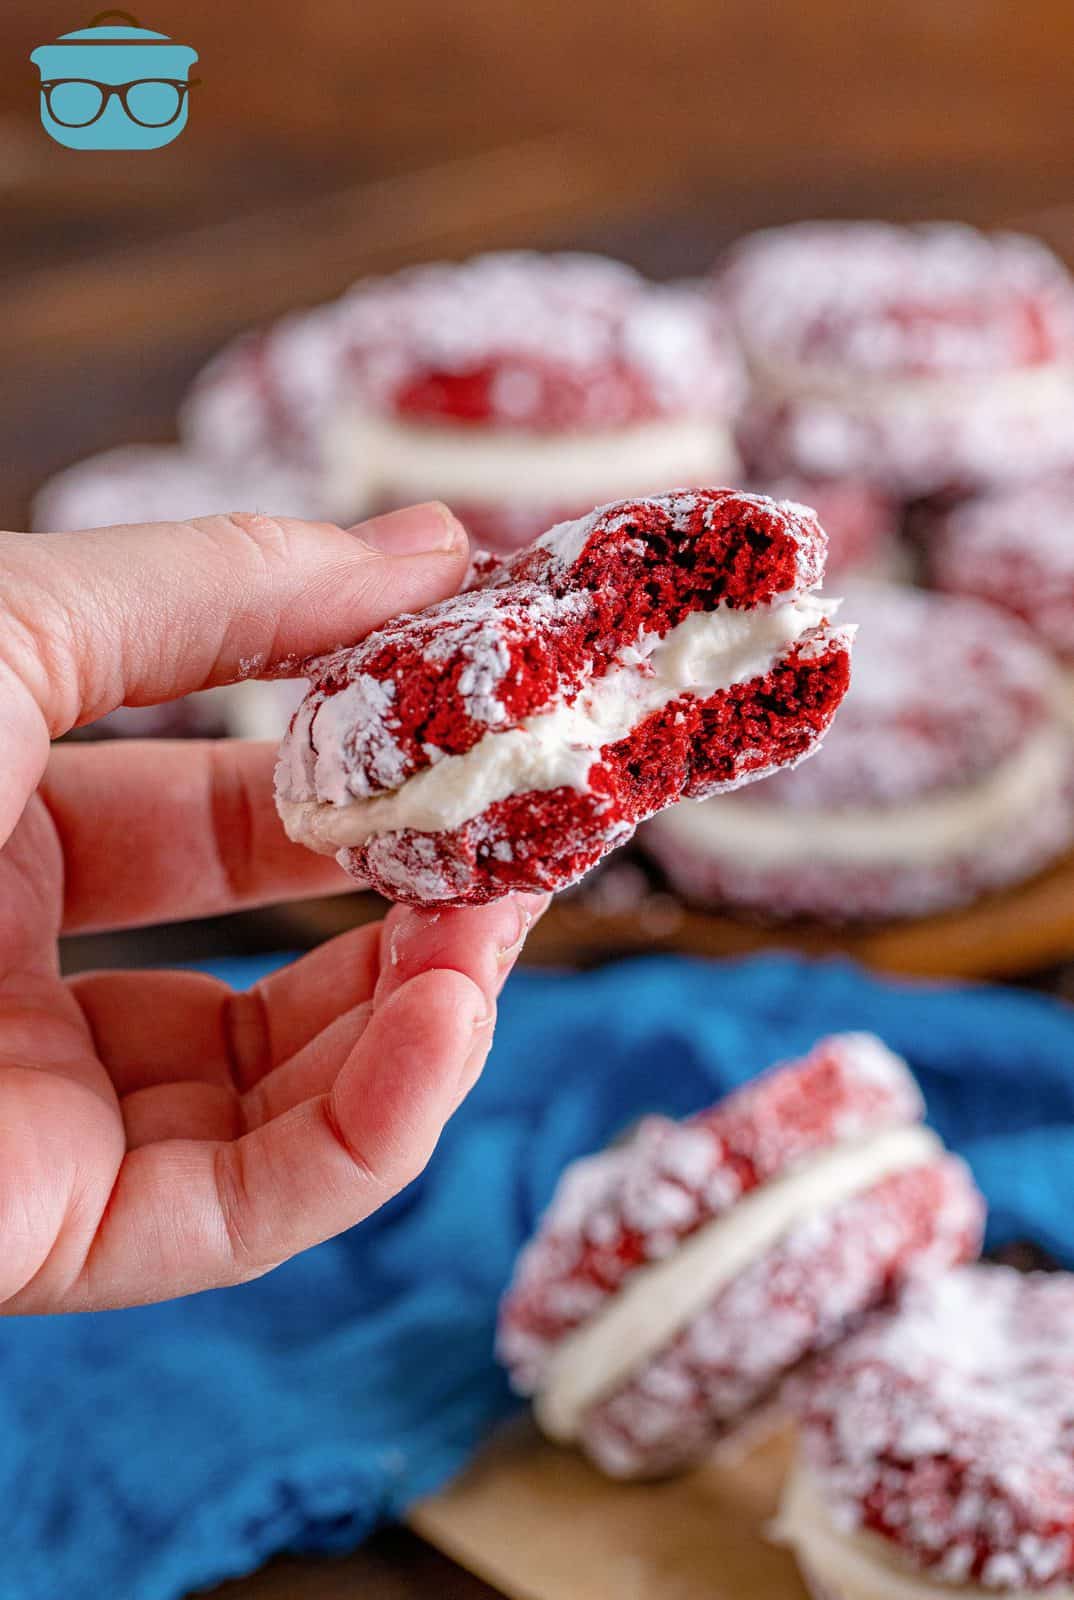 Hand holding one Red Velvet Sandwich Cookie with bite taken out of it.